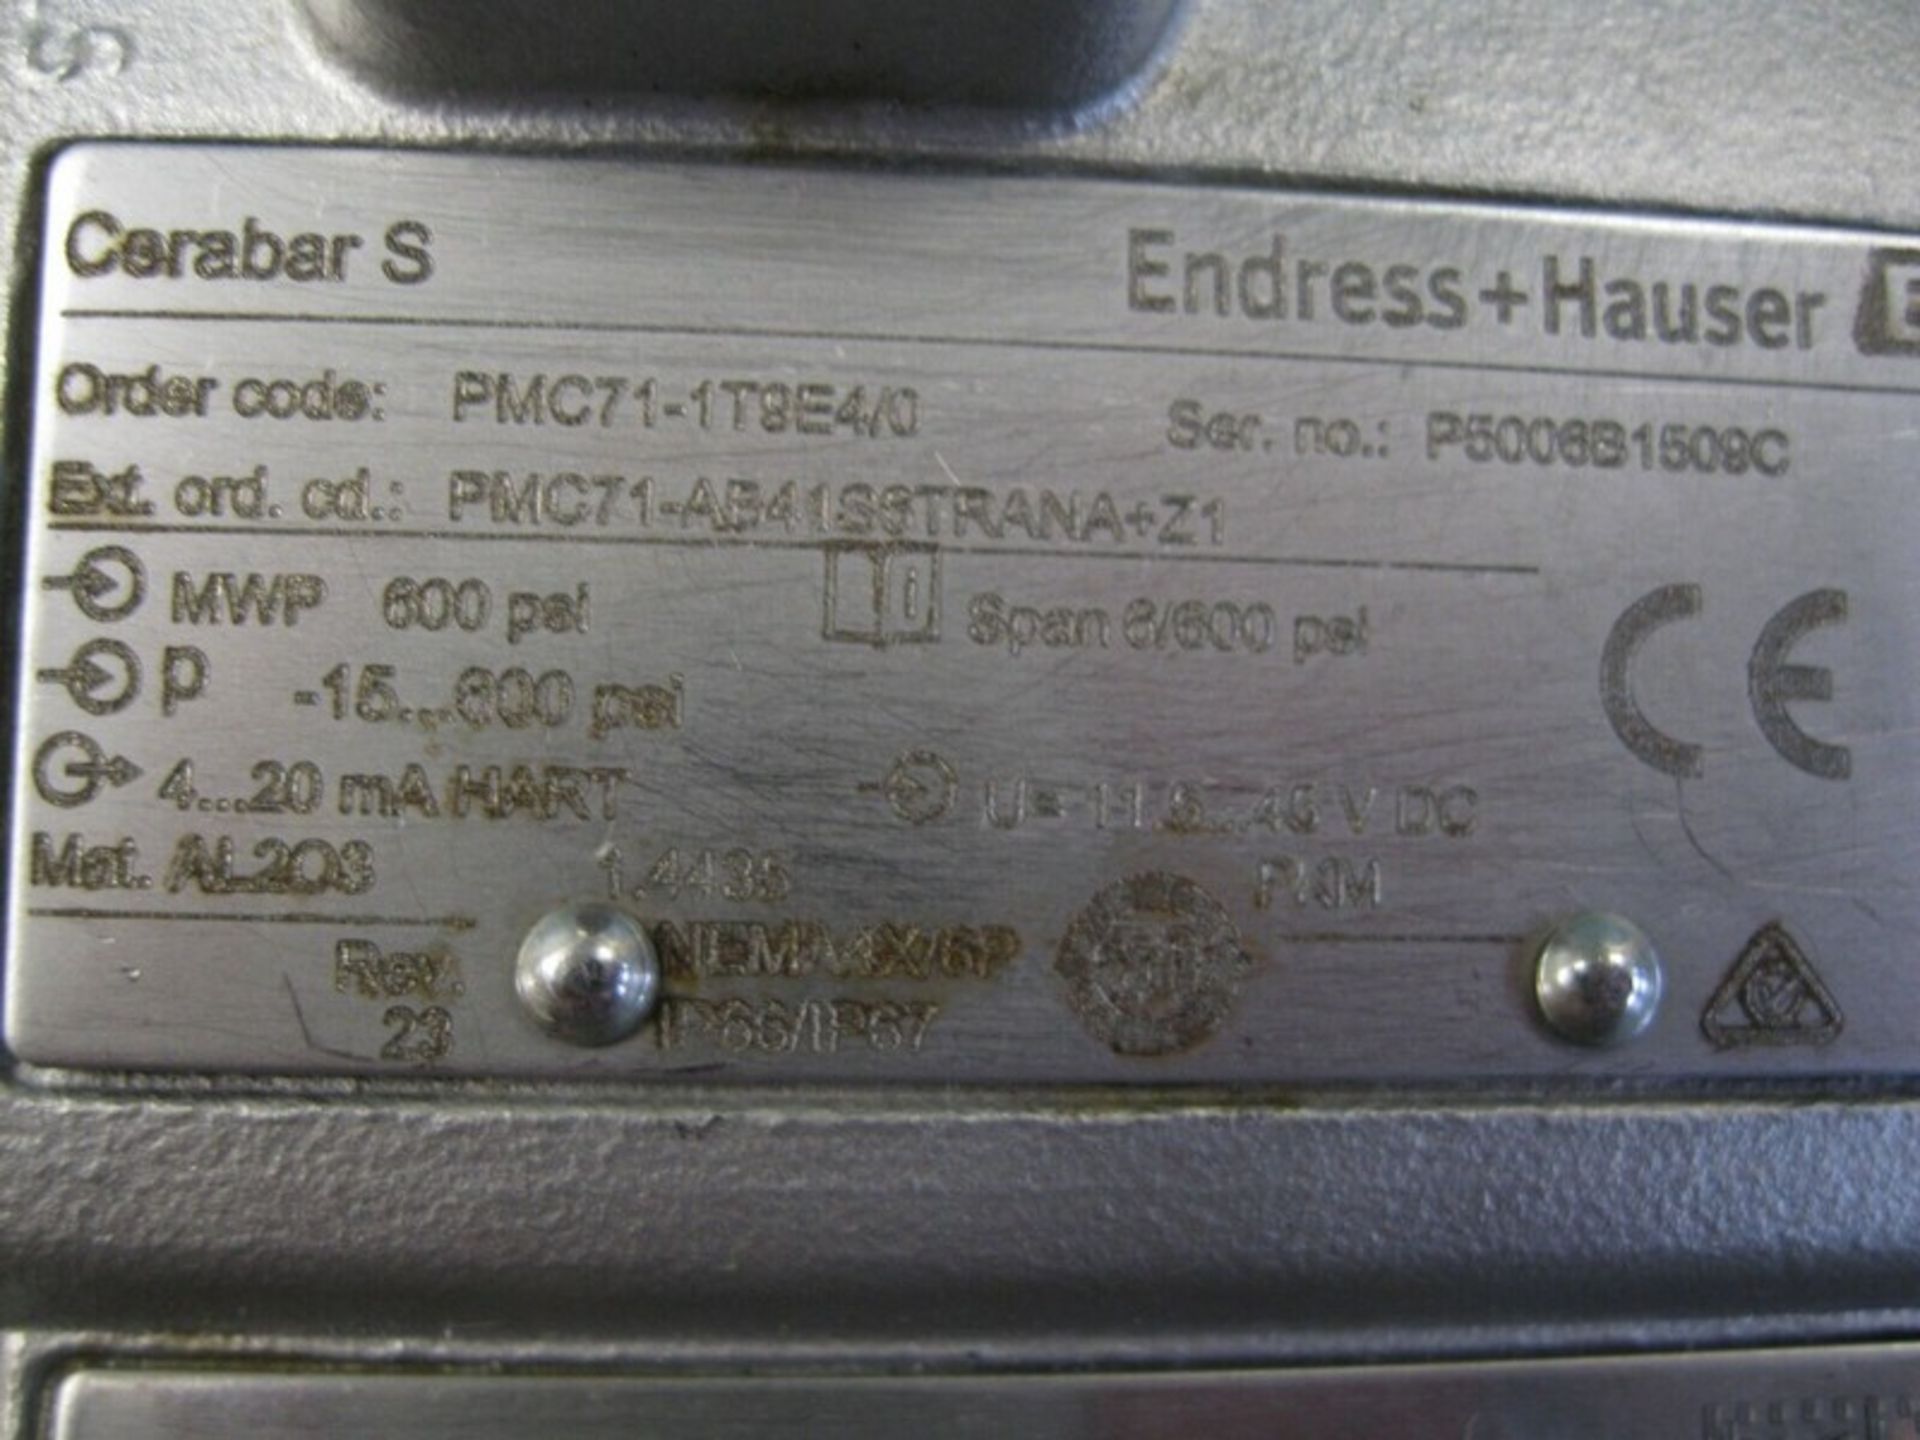 Endress Hauser PMC71-1T9E4/0 Cerabar S Pressure Transmitter (Located Springfield, NH)(Handling - Image 5 of 5